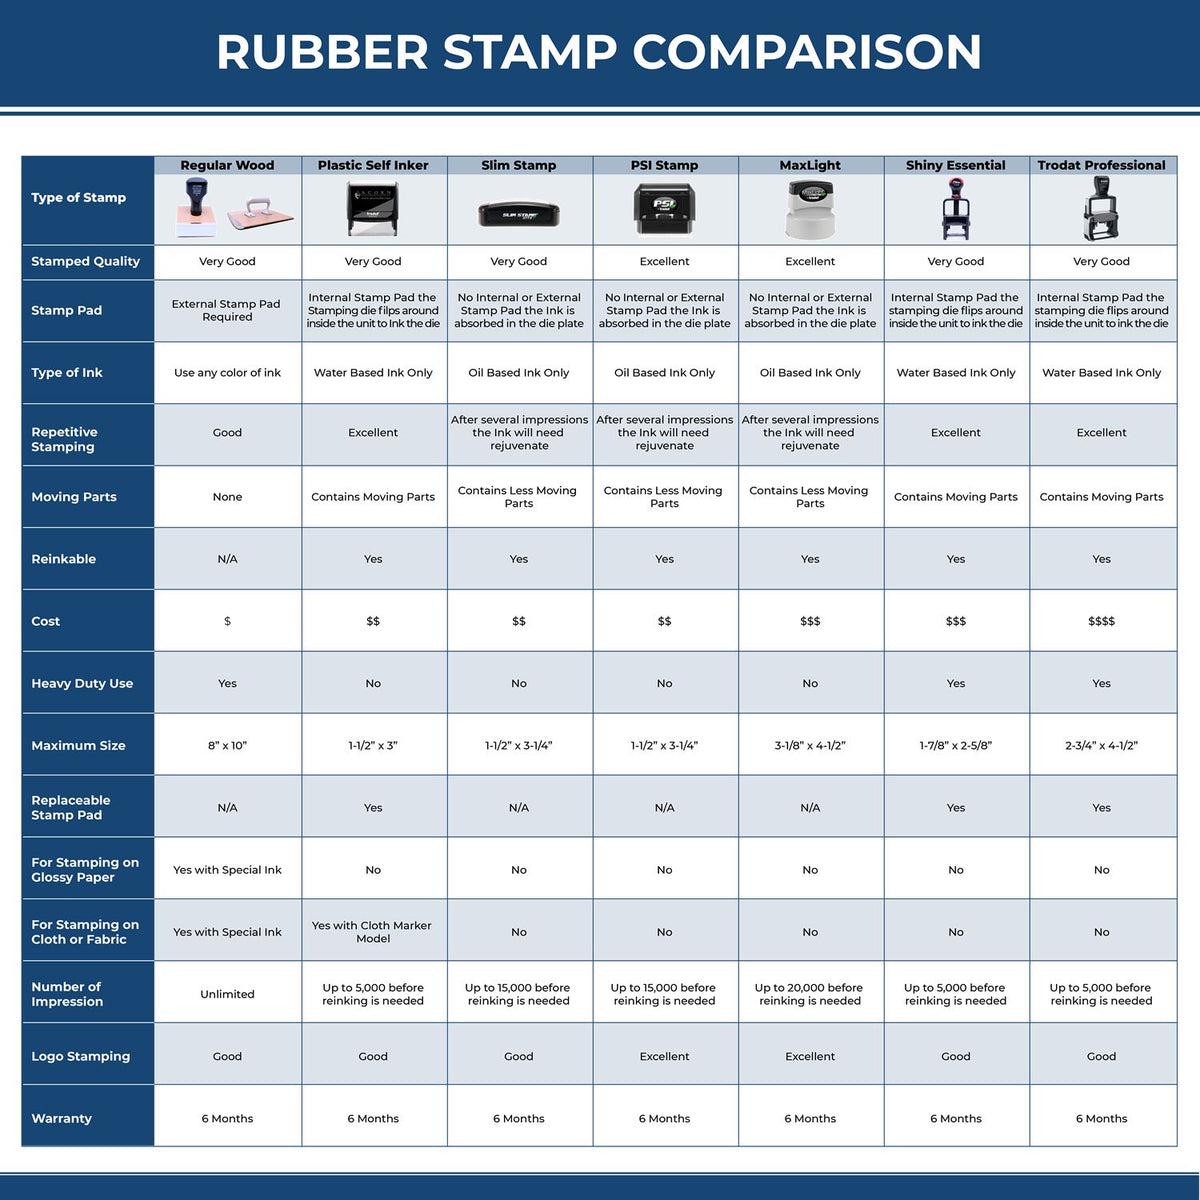 Large Self-Inking Bold File Stamp 4868S Rubber Stamp Comparison